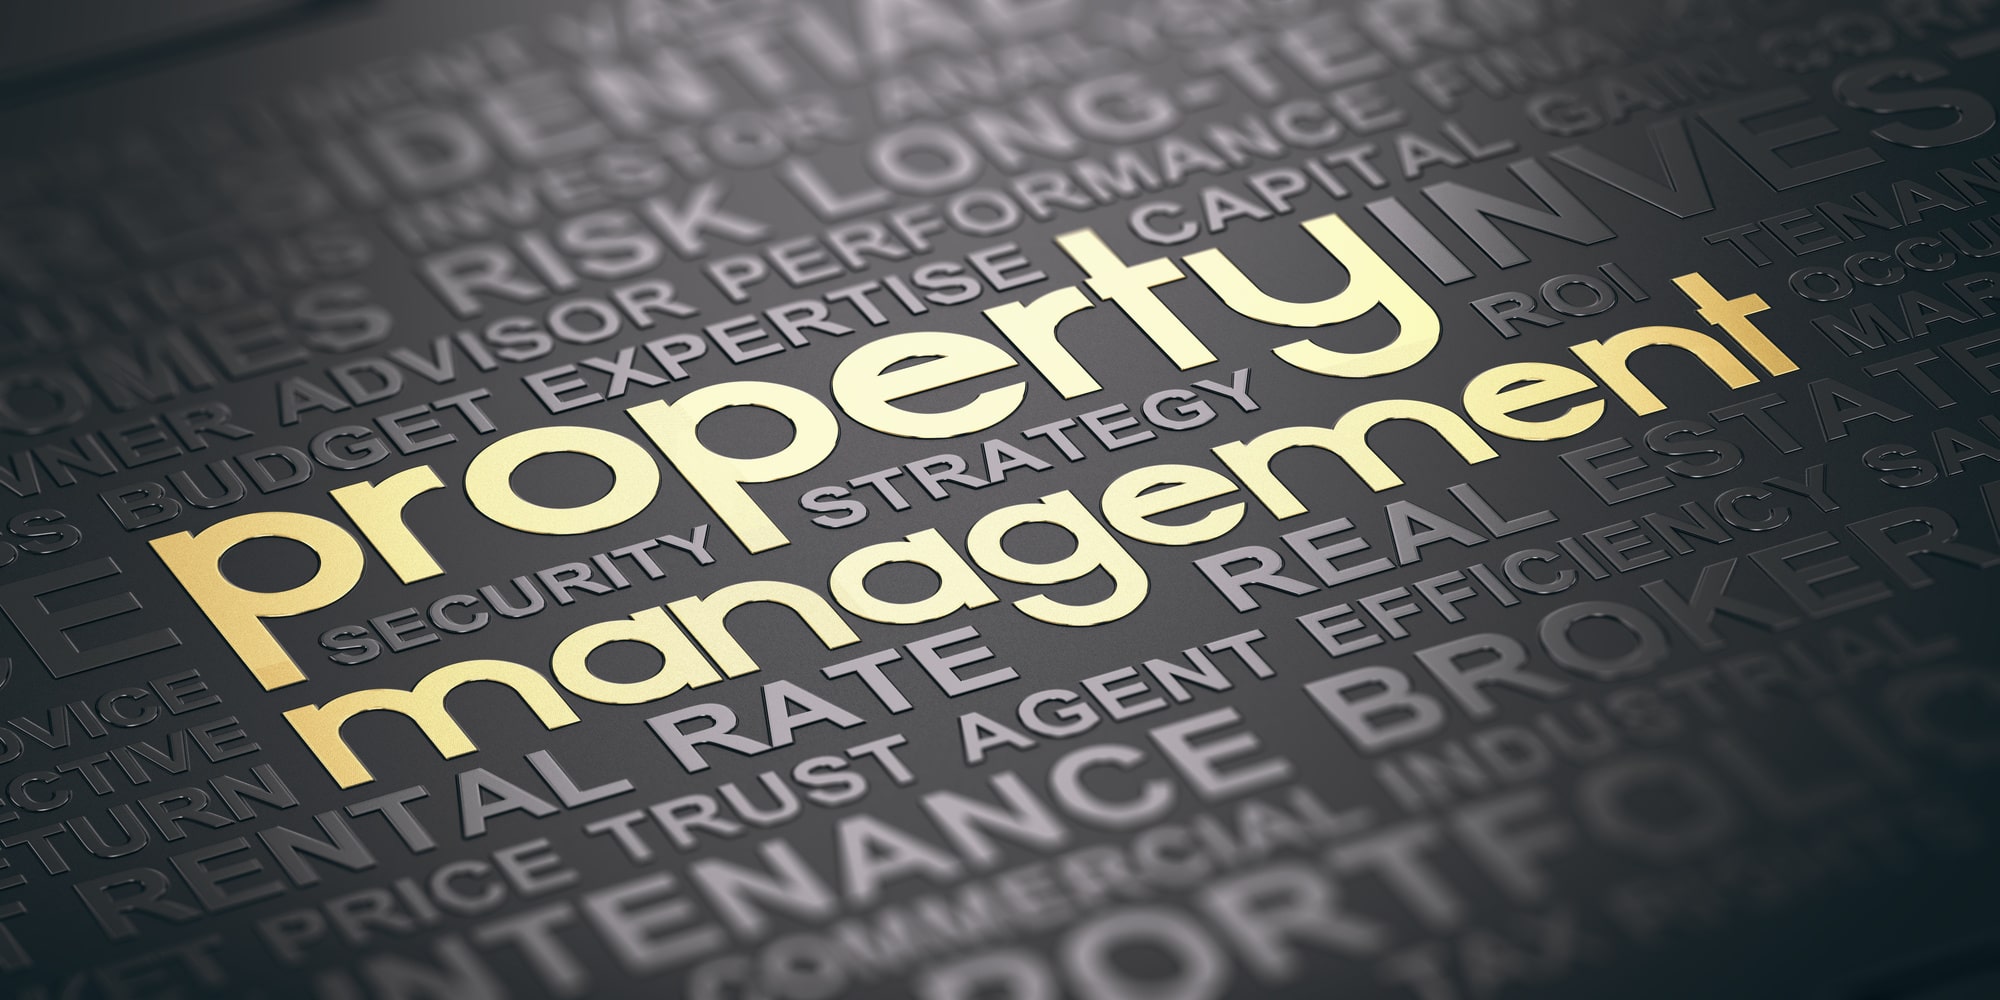 4 Mistakes That Property Managers Should Avoid